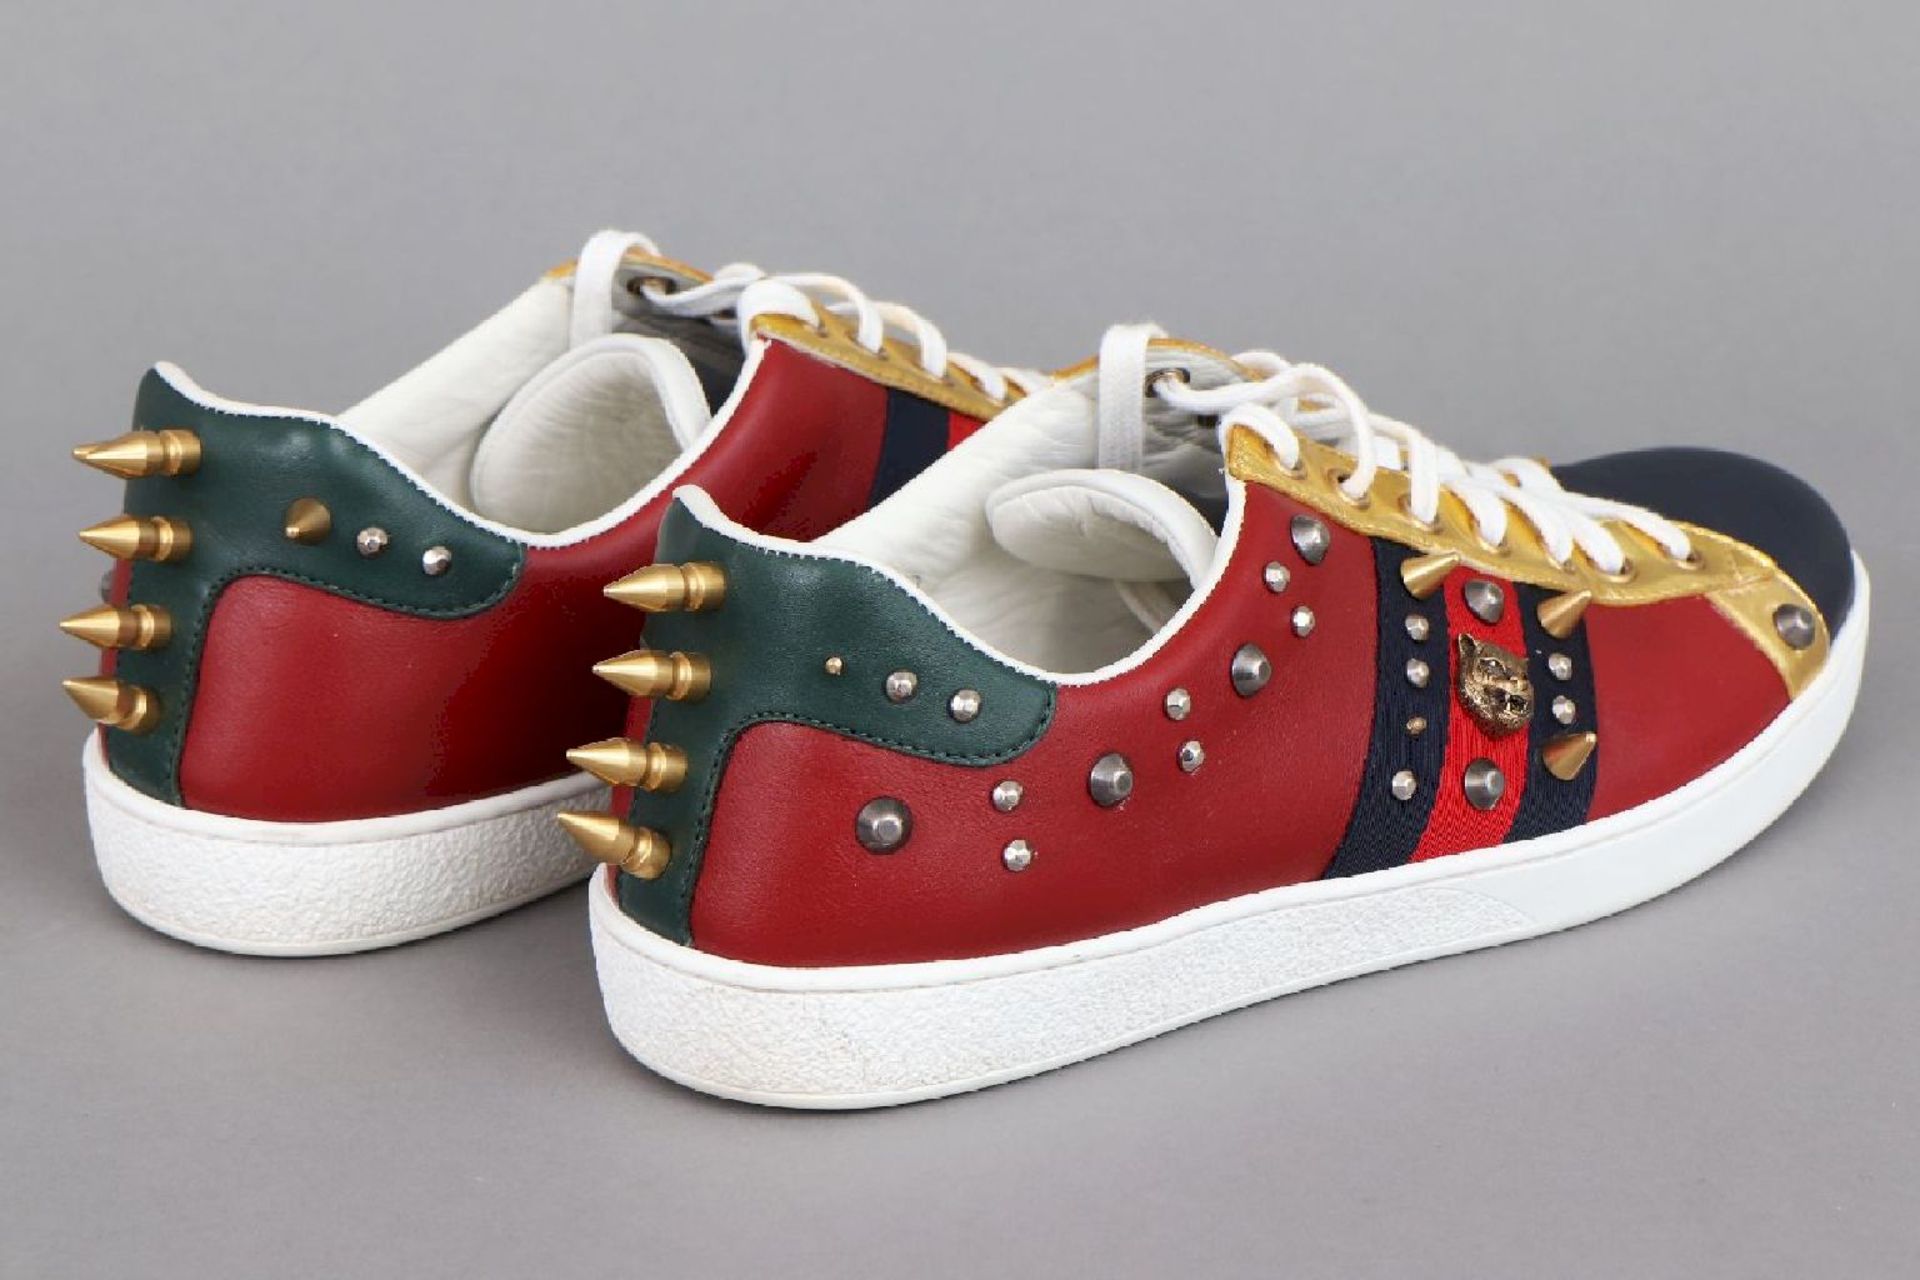 GUCCI Sneaker ACE studded - Image 4 of 8